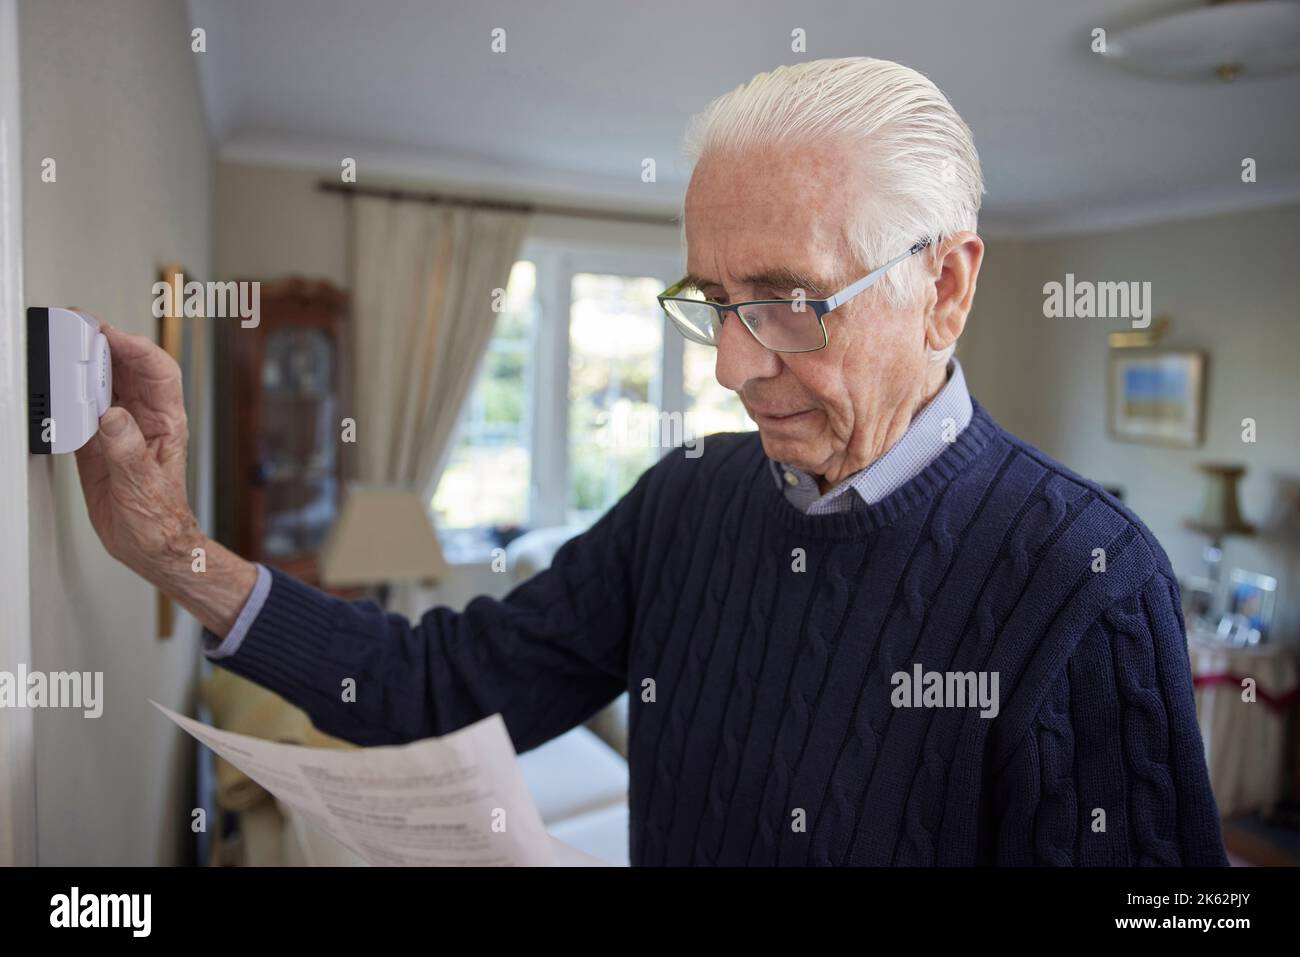 Worried Senior Man With Bill Turning Down Central Heating Thermostat At Home In Energy Crisis Stock Photo